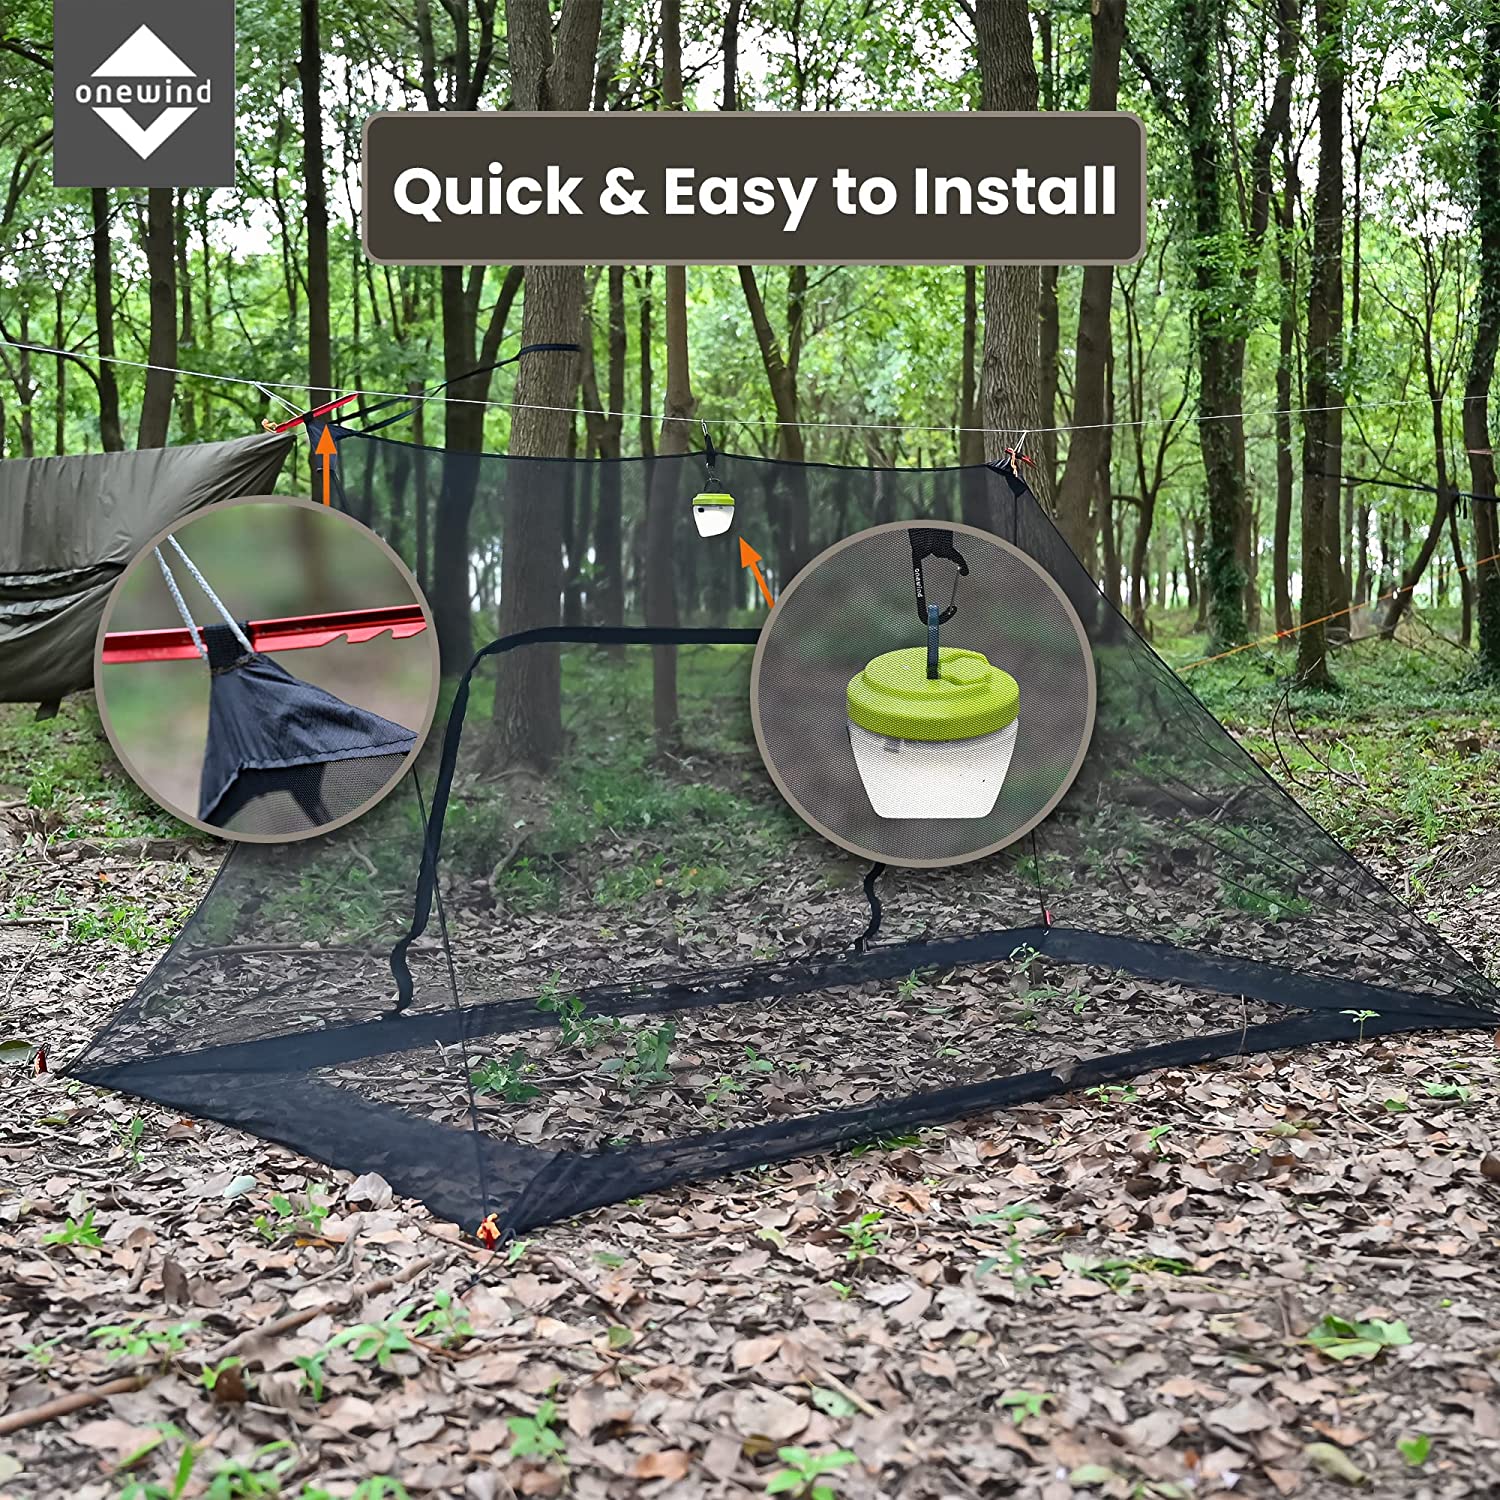 Survival Shelter Bugnet Features | Onewind Outdoors